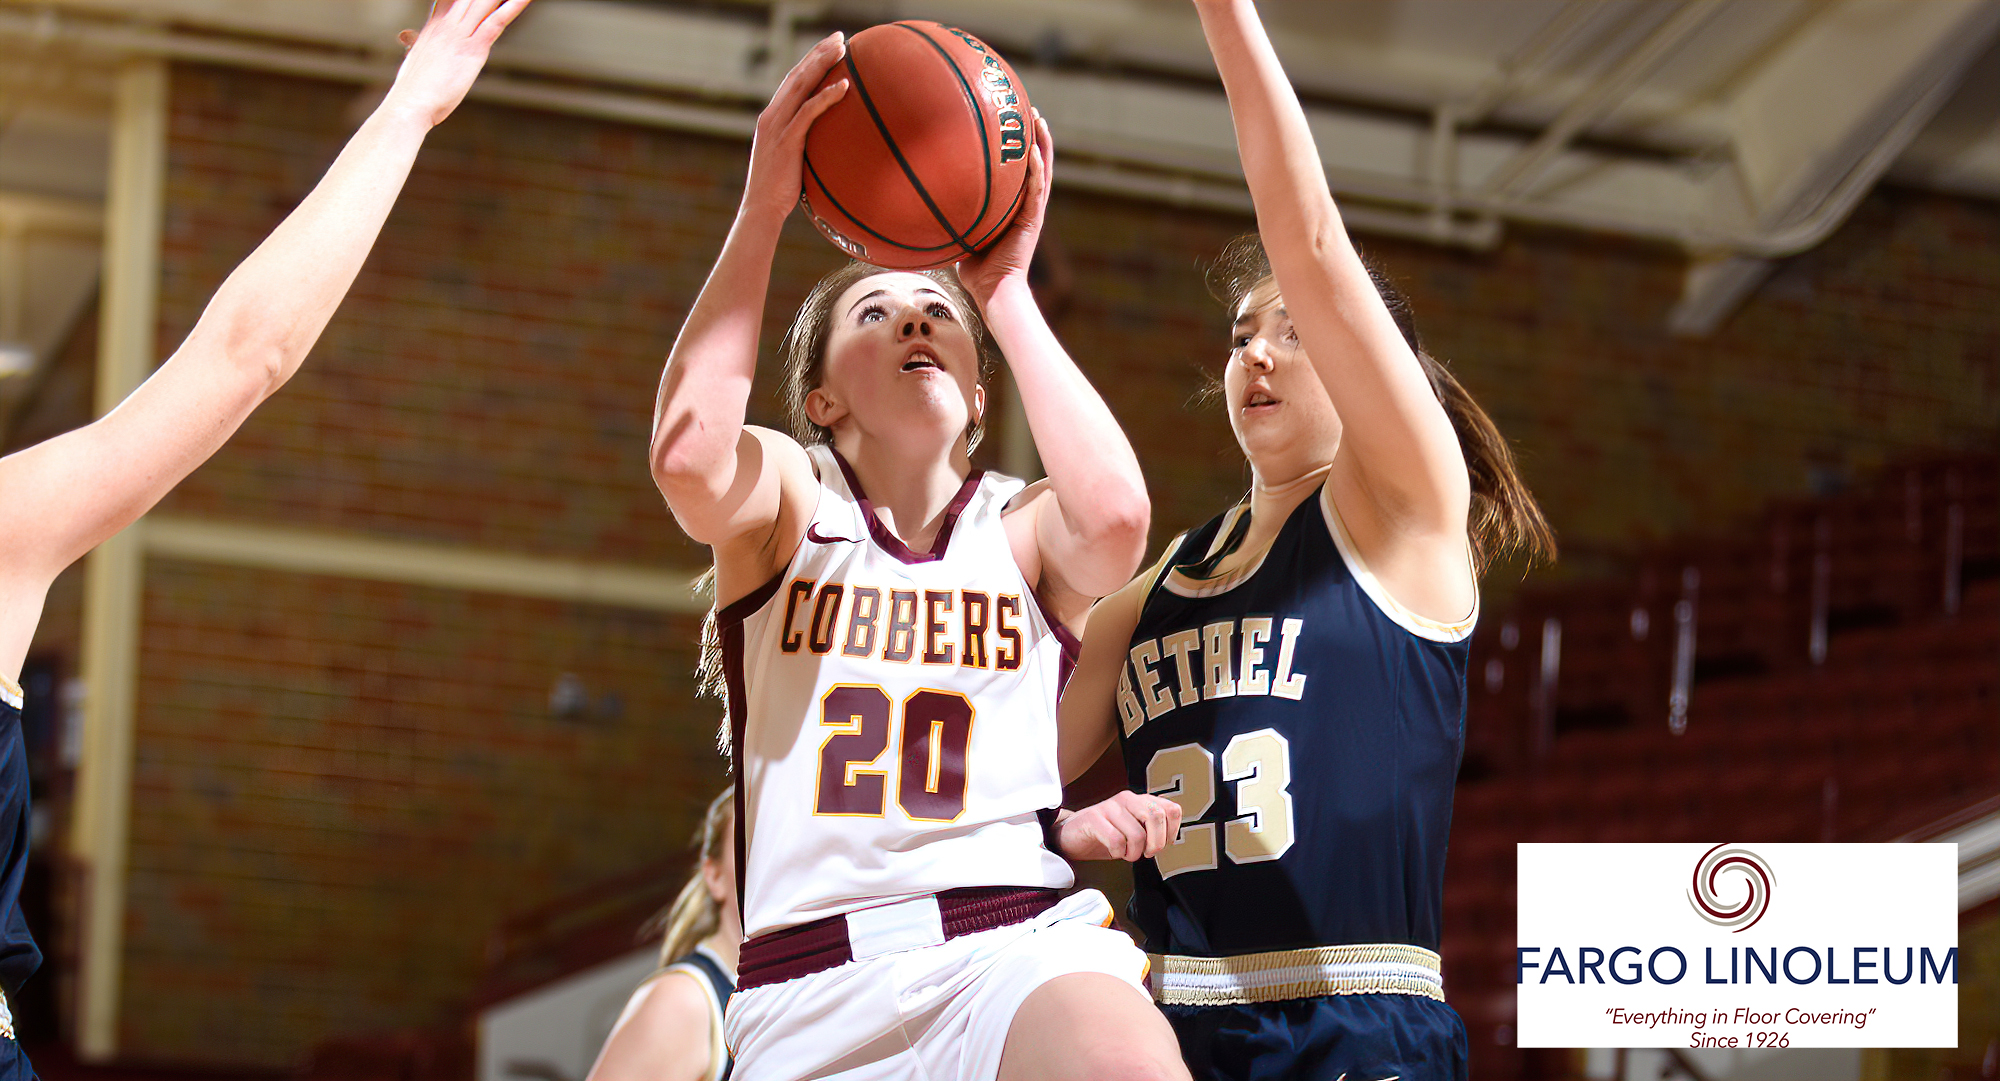 Emily Beseman drives the ball to the basket and goes up for two of her game-high 24 points in the first half of the Cobbers' win over Bethel.